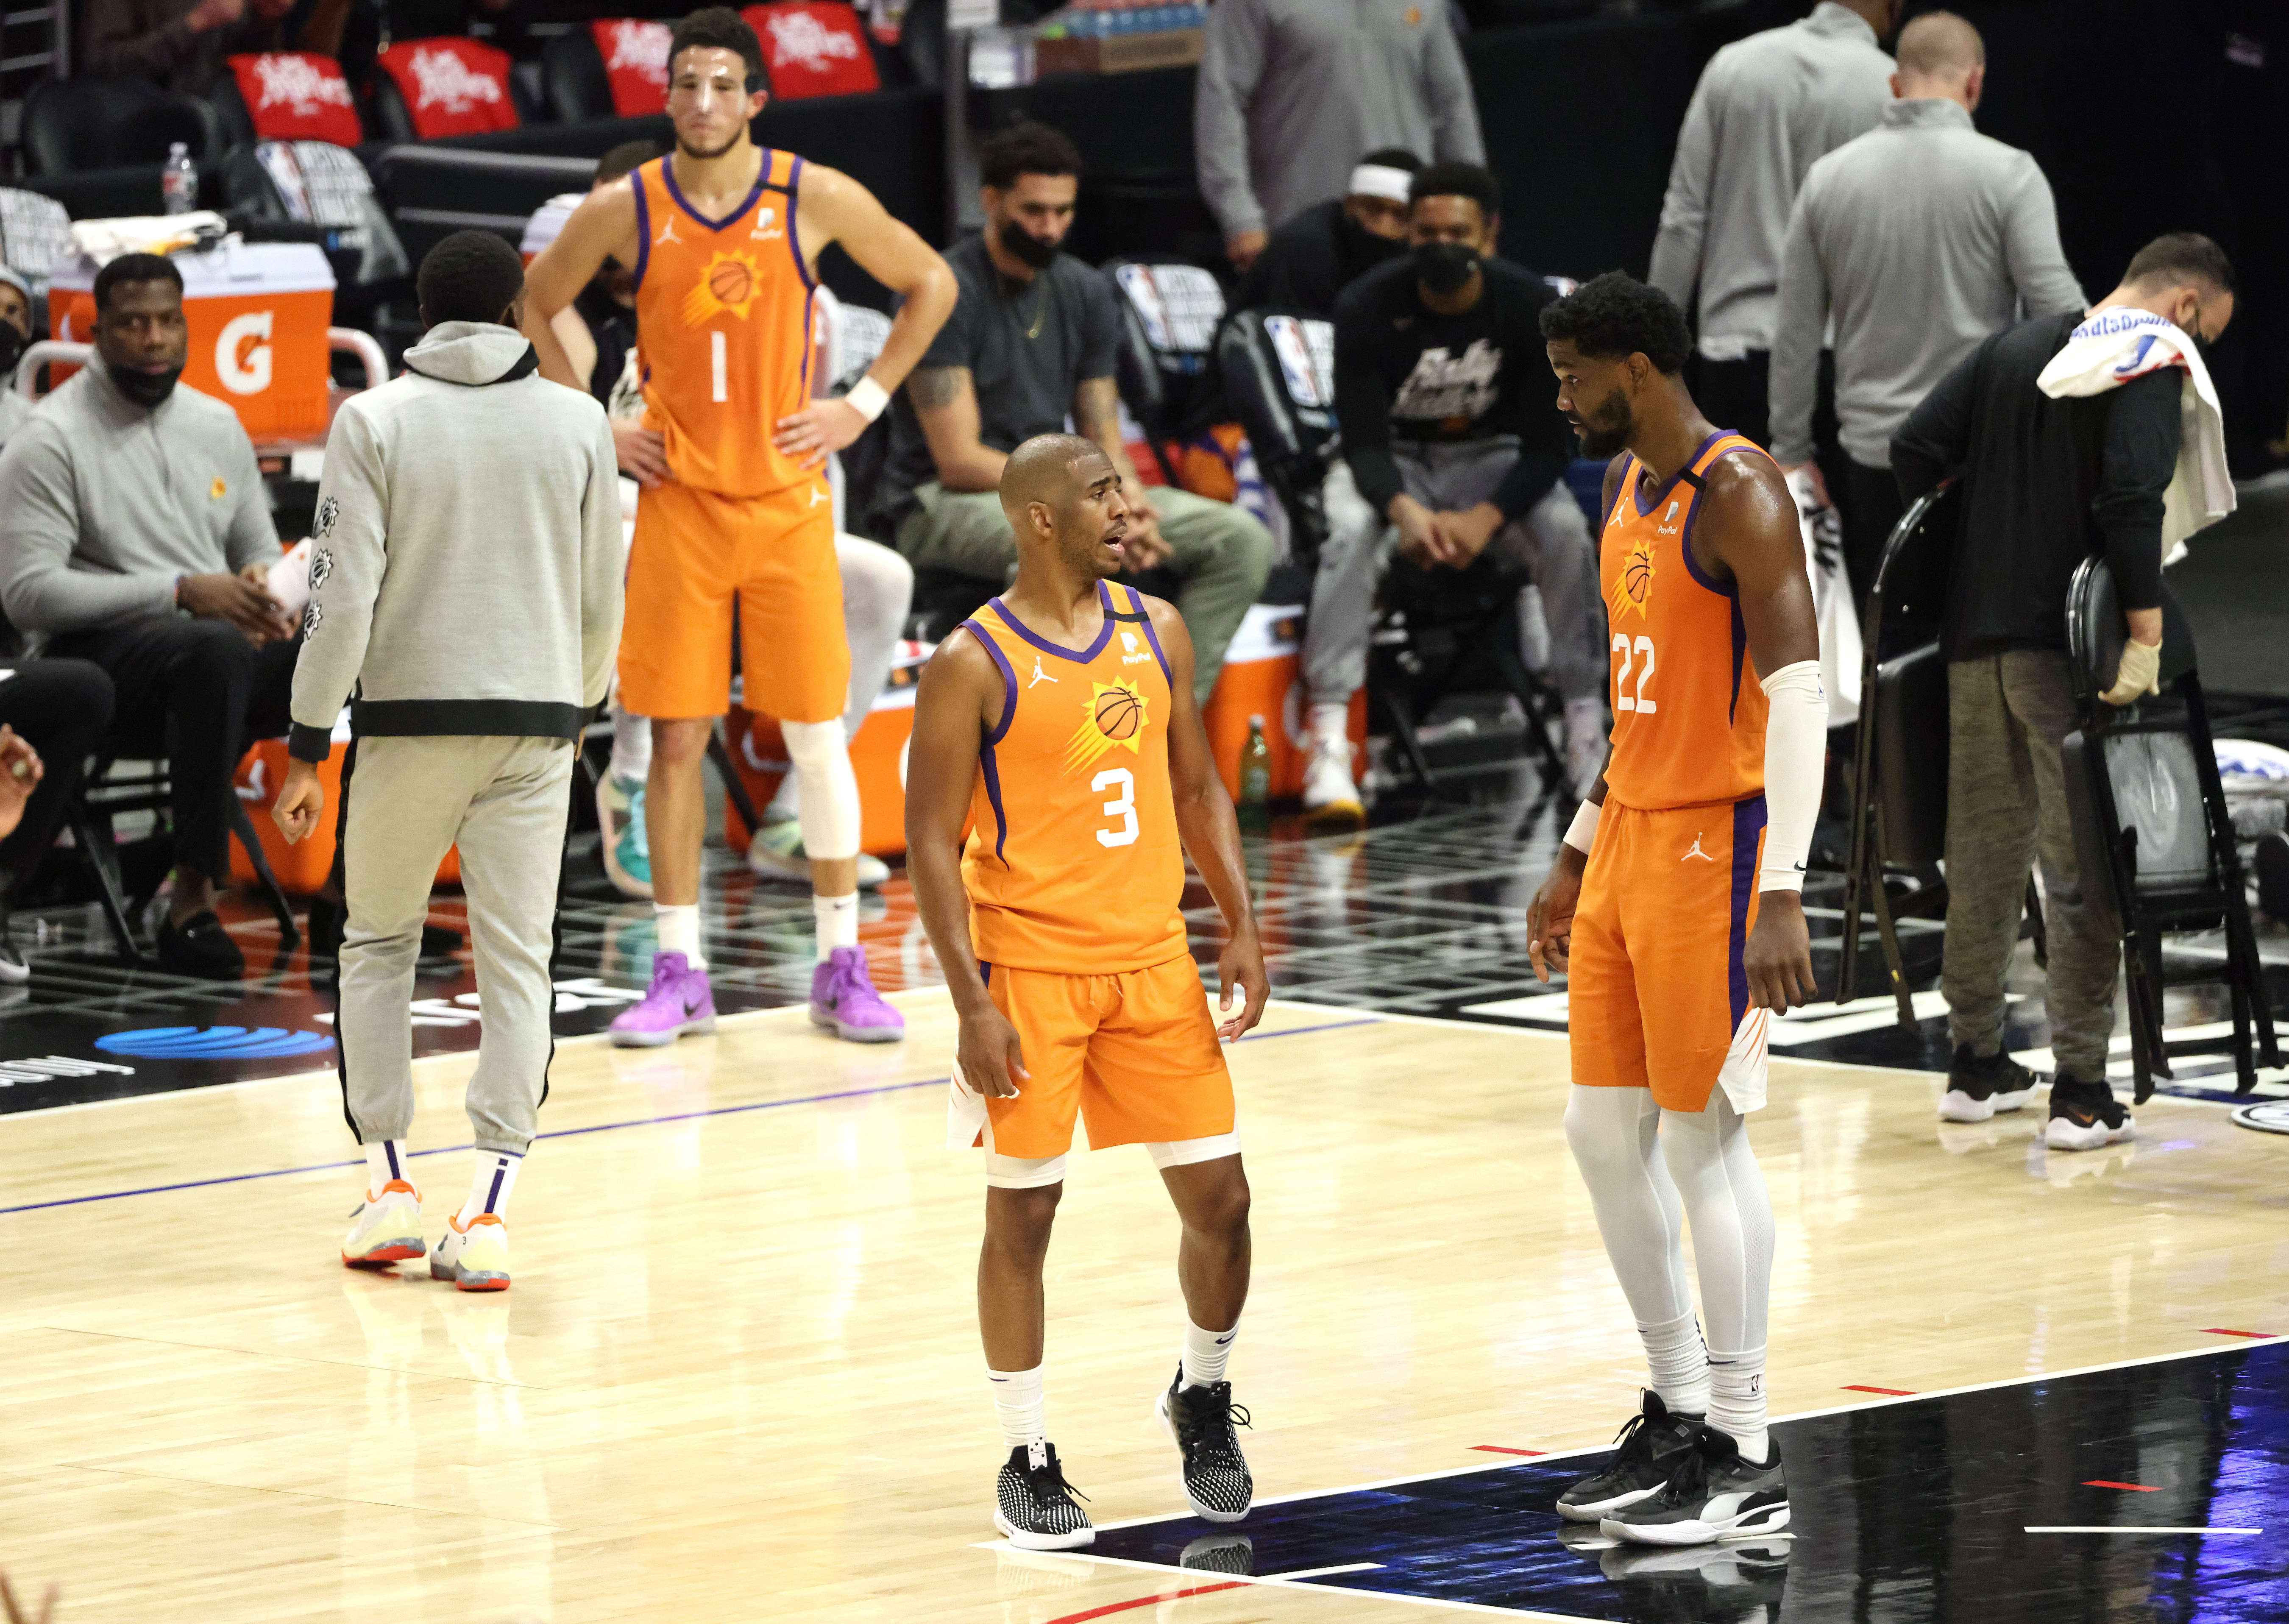 Suns teammates Chris Paul and Deandre Ayton talk during the 2021 NBA Playoffs